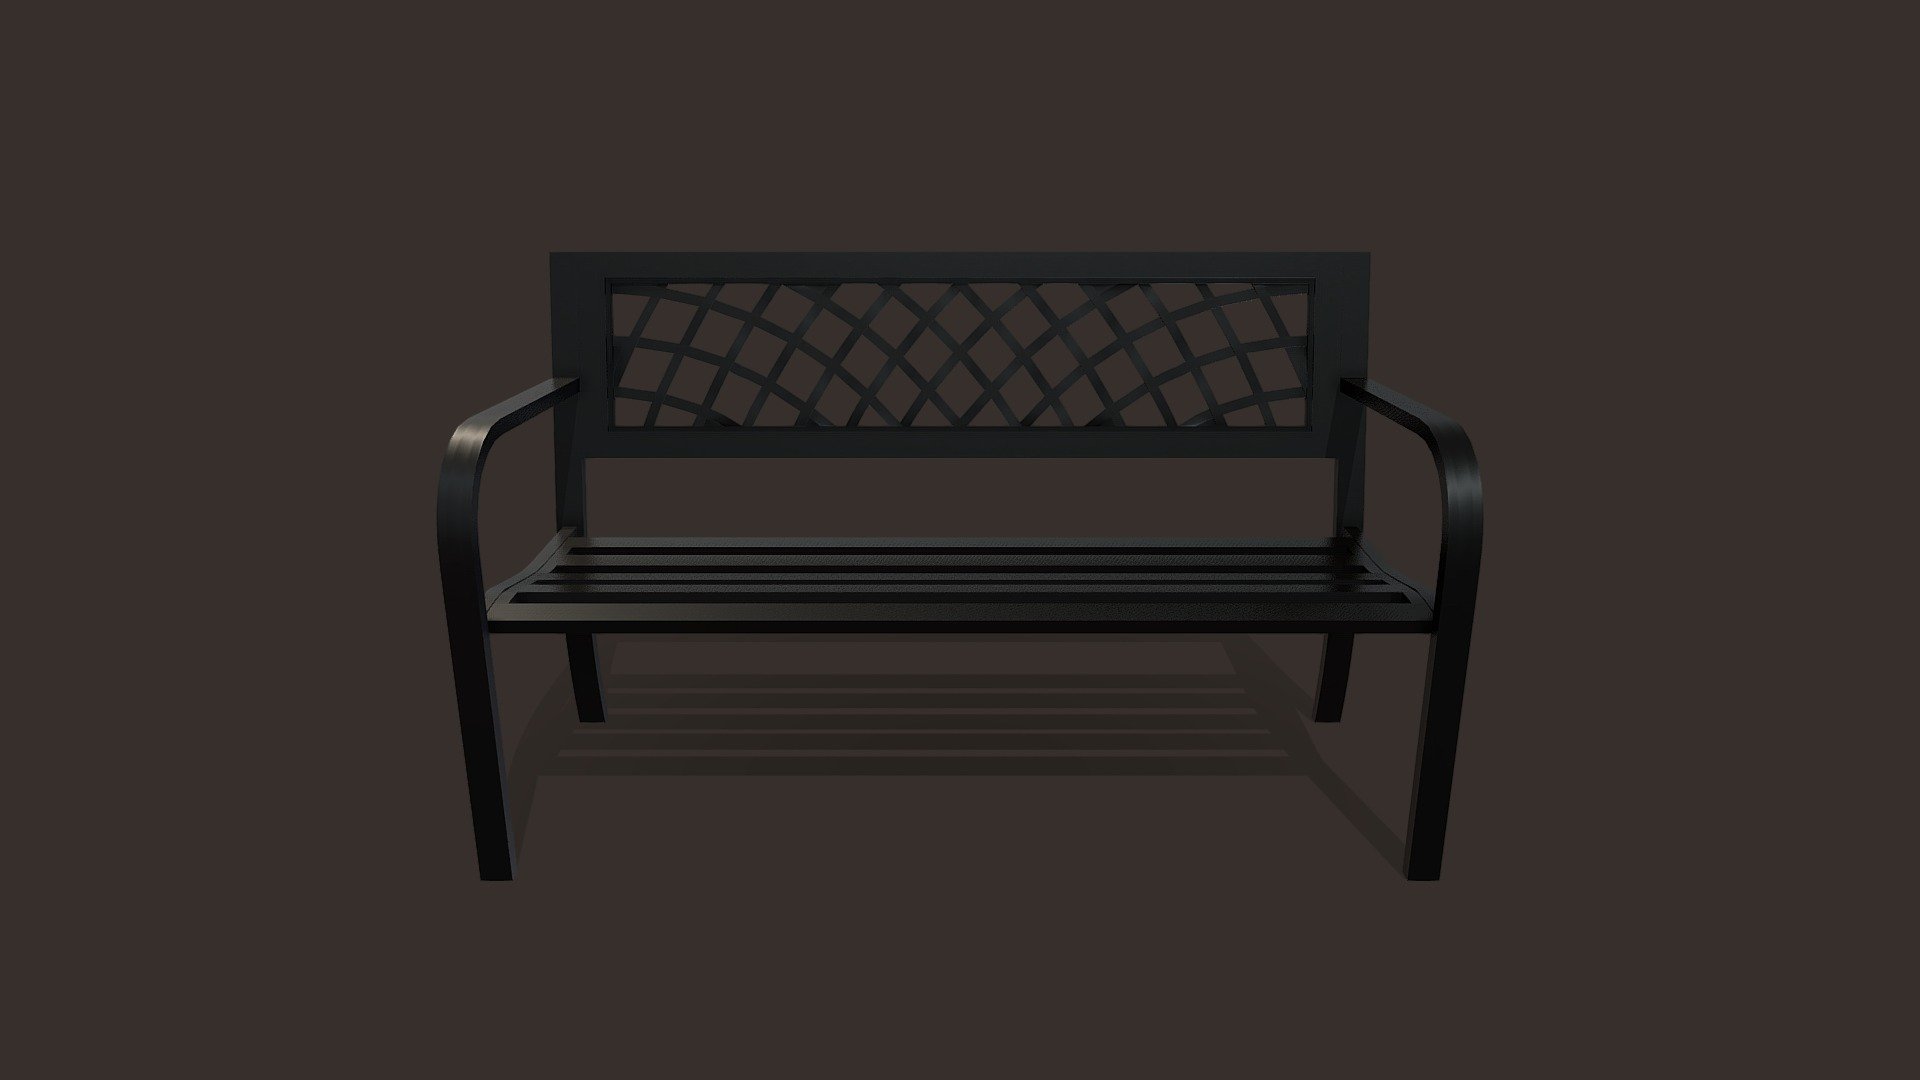 Outdoor bench is a model that will enhance detail and realism to any of your rendering projects. The model has a fully textured, detailed design that allows for close-up renders, and was originally modeled in Blender 3.5, Textured in Substance Painter 2023 and rendered with Adobe Stagier Renders have no post-processing.

Features: -High-quality polygonal model, correctly scaled for an accurate representation of the original object. -The model’s resolutions are optimized for polygon efficiency. -The model is fully textured with all materials applied. -All textures and materials are included and mapped in every format. -No cleaning up necessary just drop your models into the scene and start rendering. -No special plugin needed to open scene.

Measurements: Units: M

File Formats: OBJ FBX

Textures Formats: PNG 4k - Outdoor bench - Buy Royalty Free 3D model by MDgraphicLAB 3d model